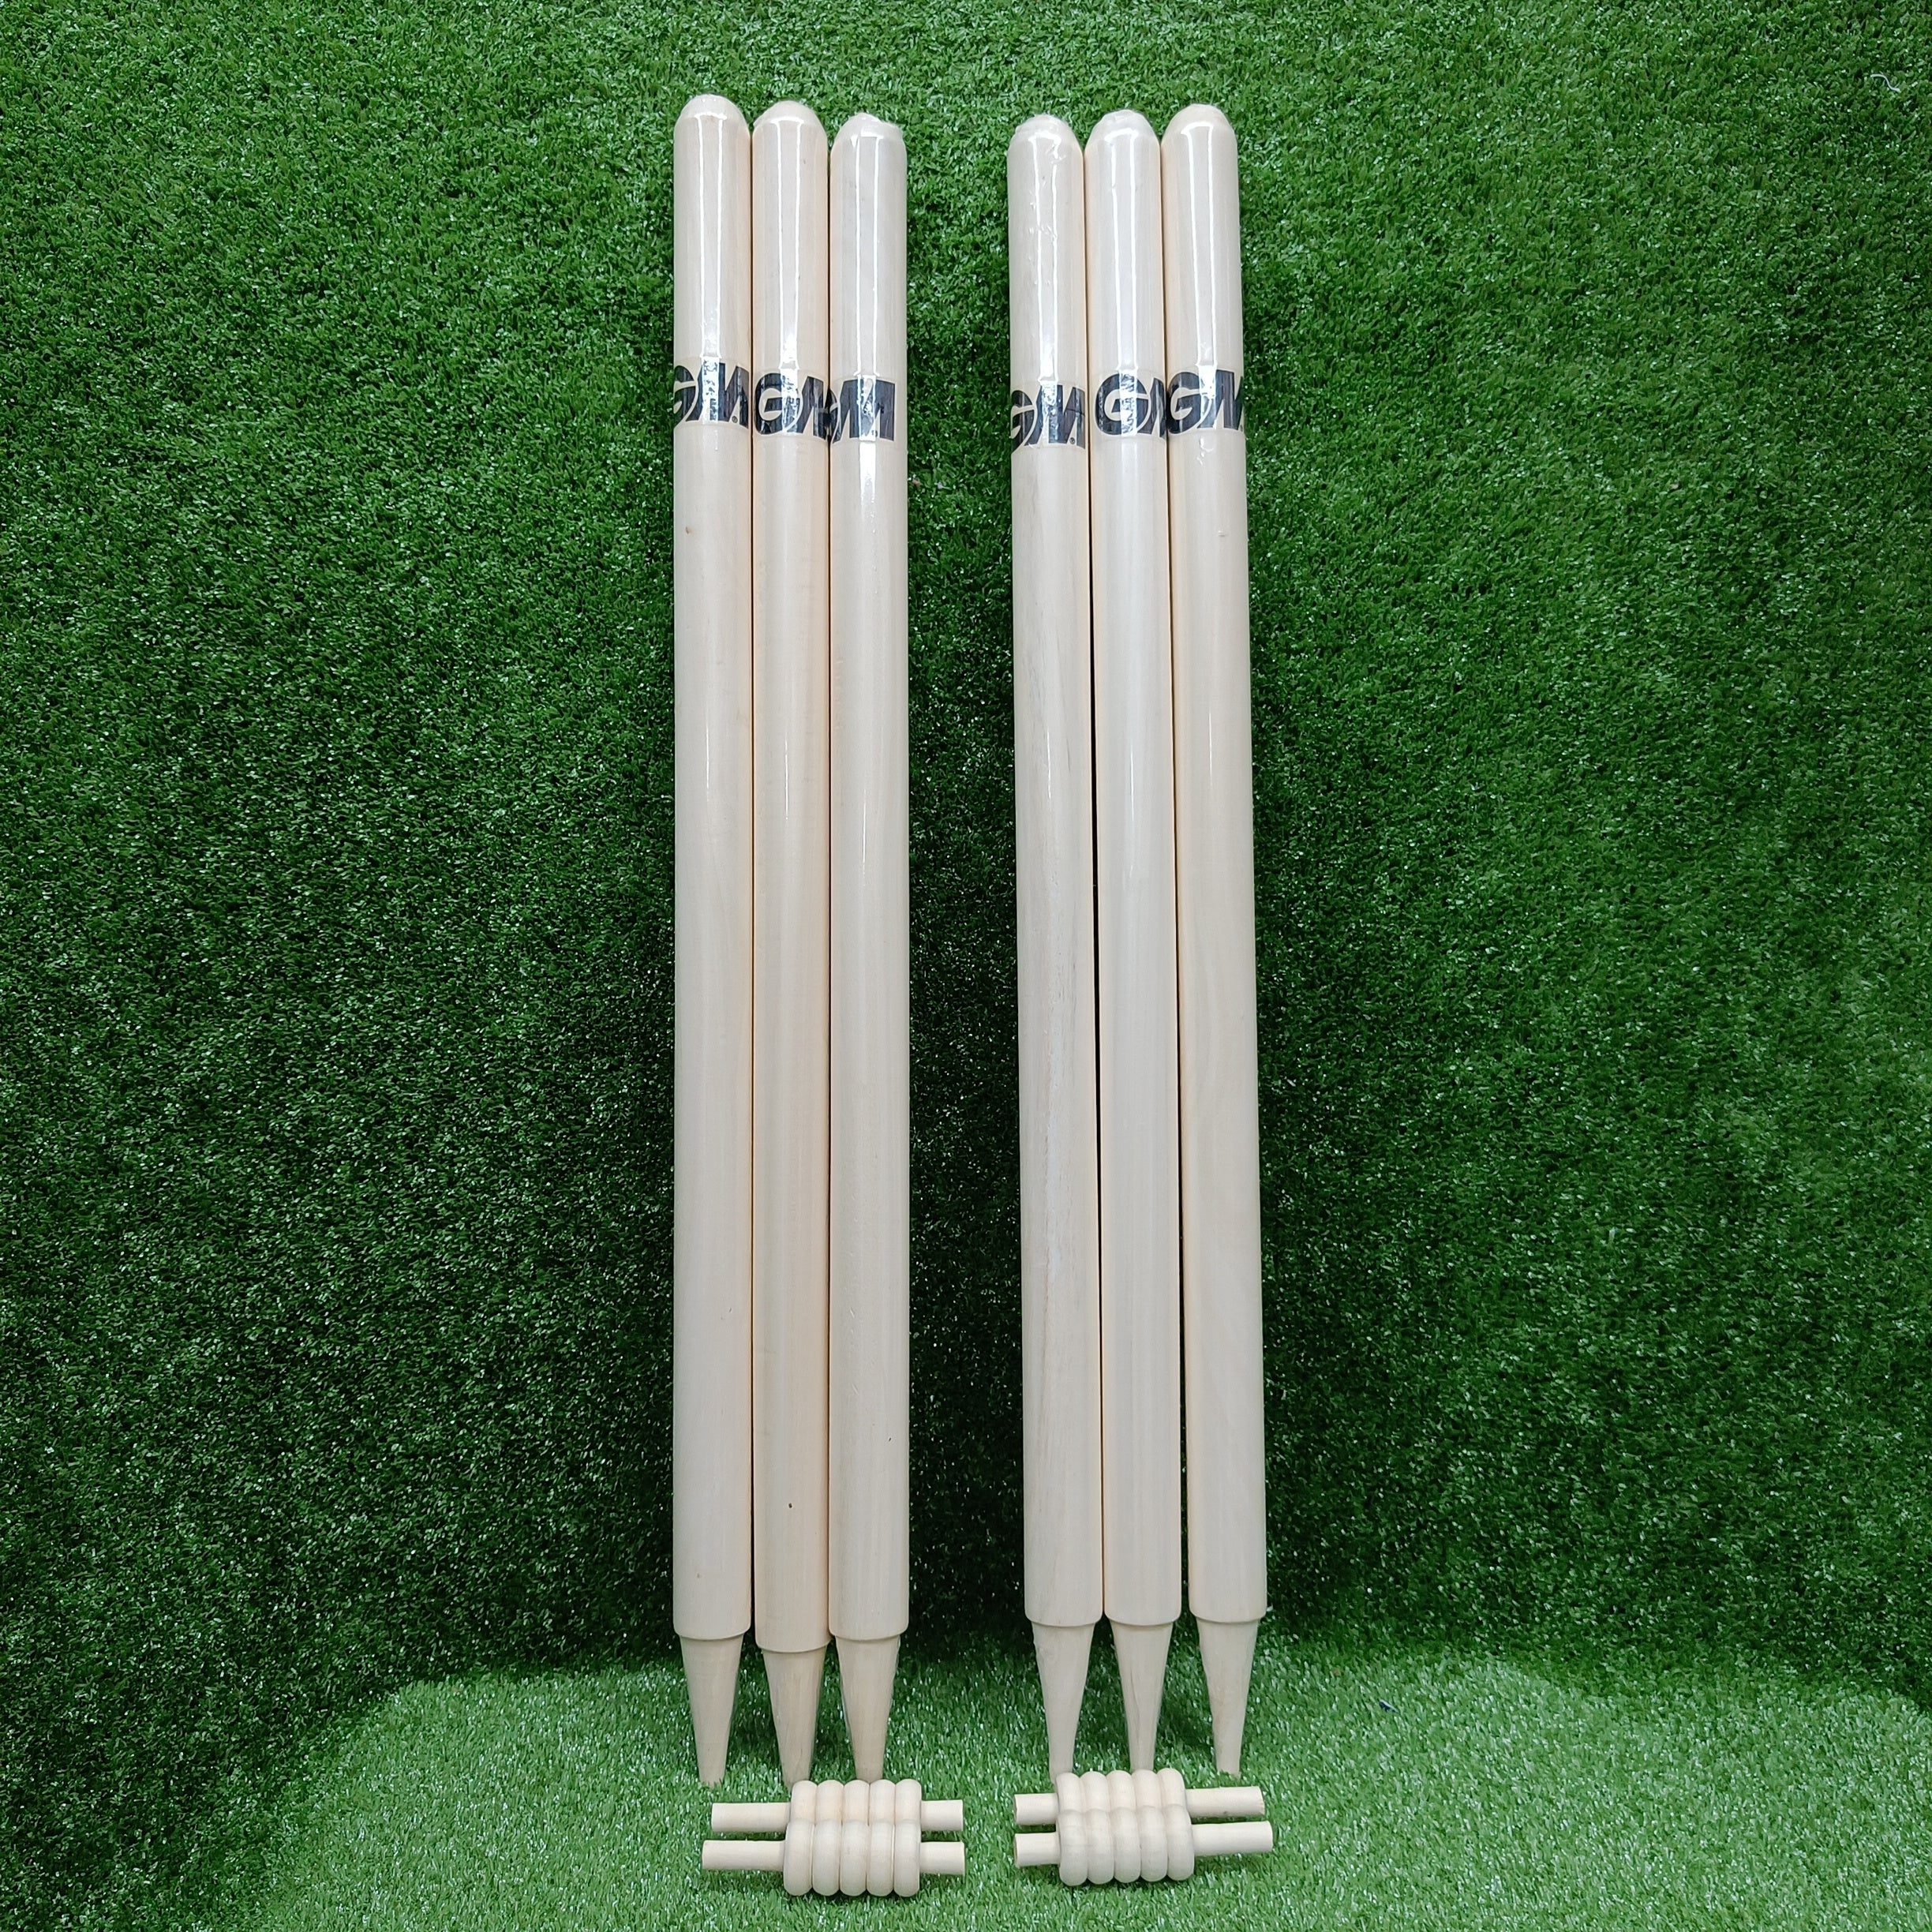 GM Bleached and Polished Cricket Stumps set